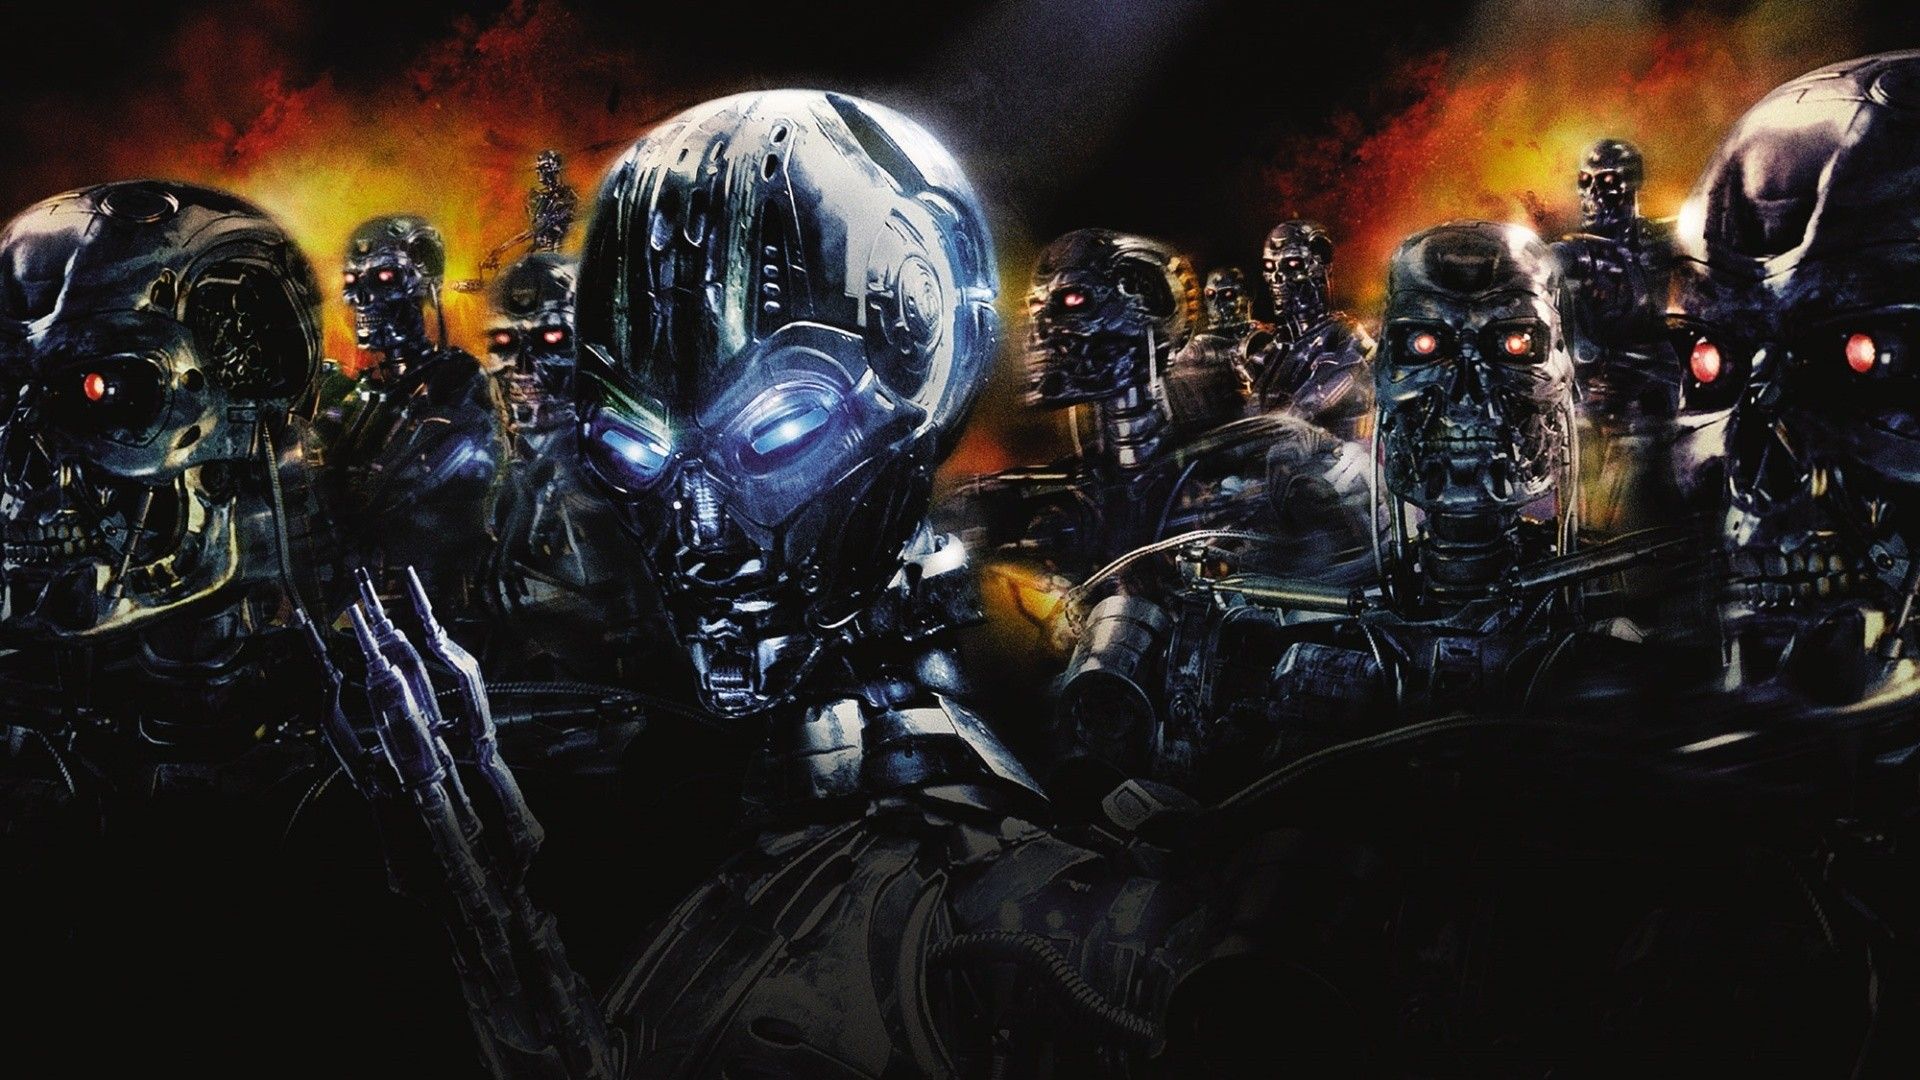 Terminator 3: Rise of the Machines background